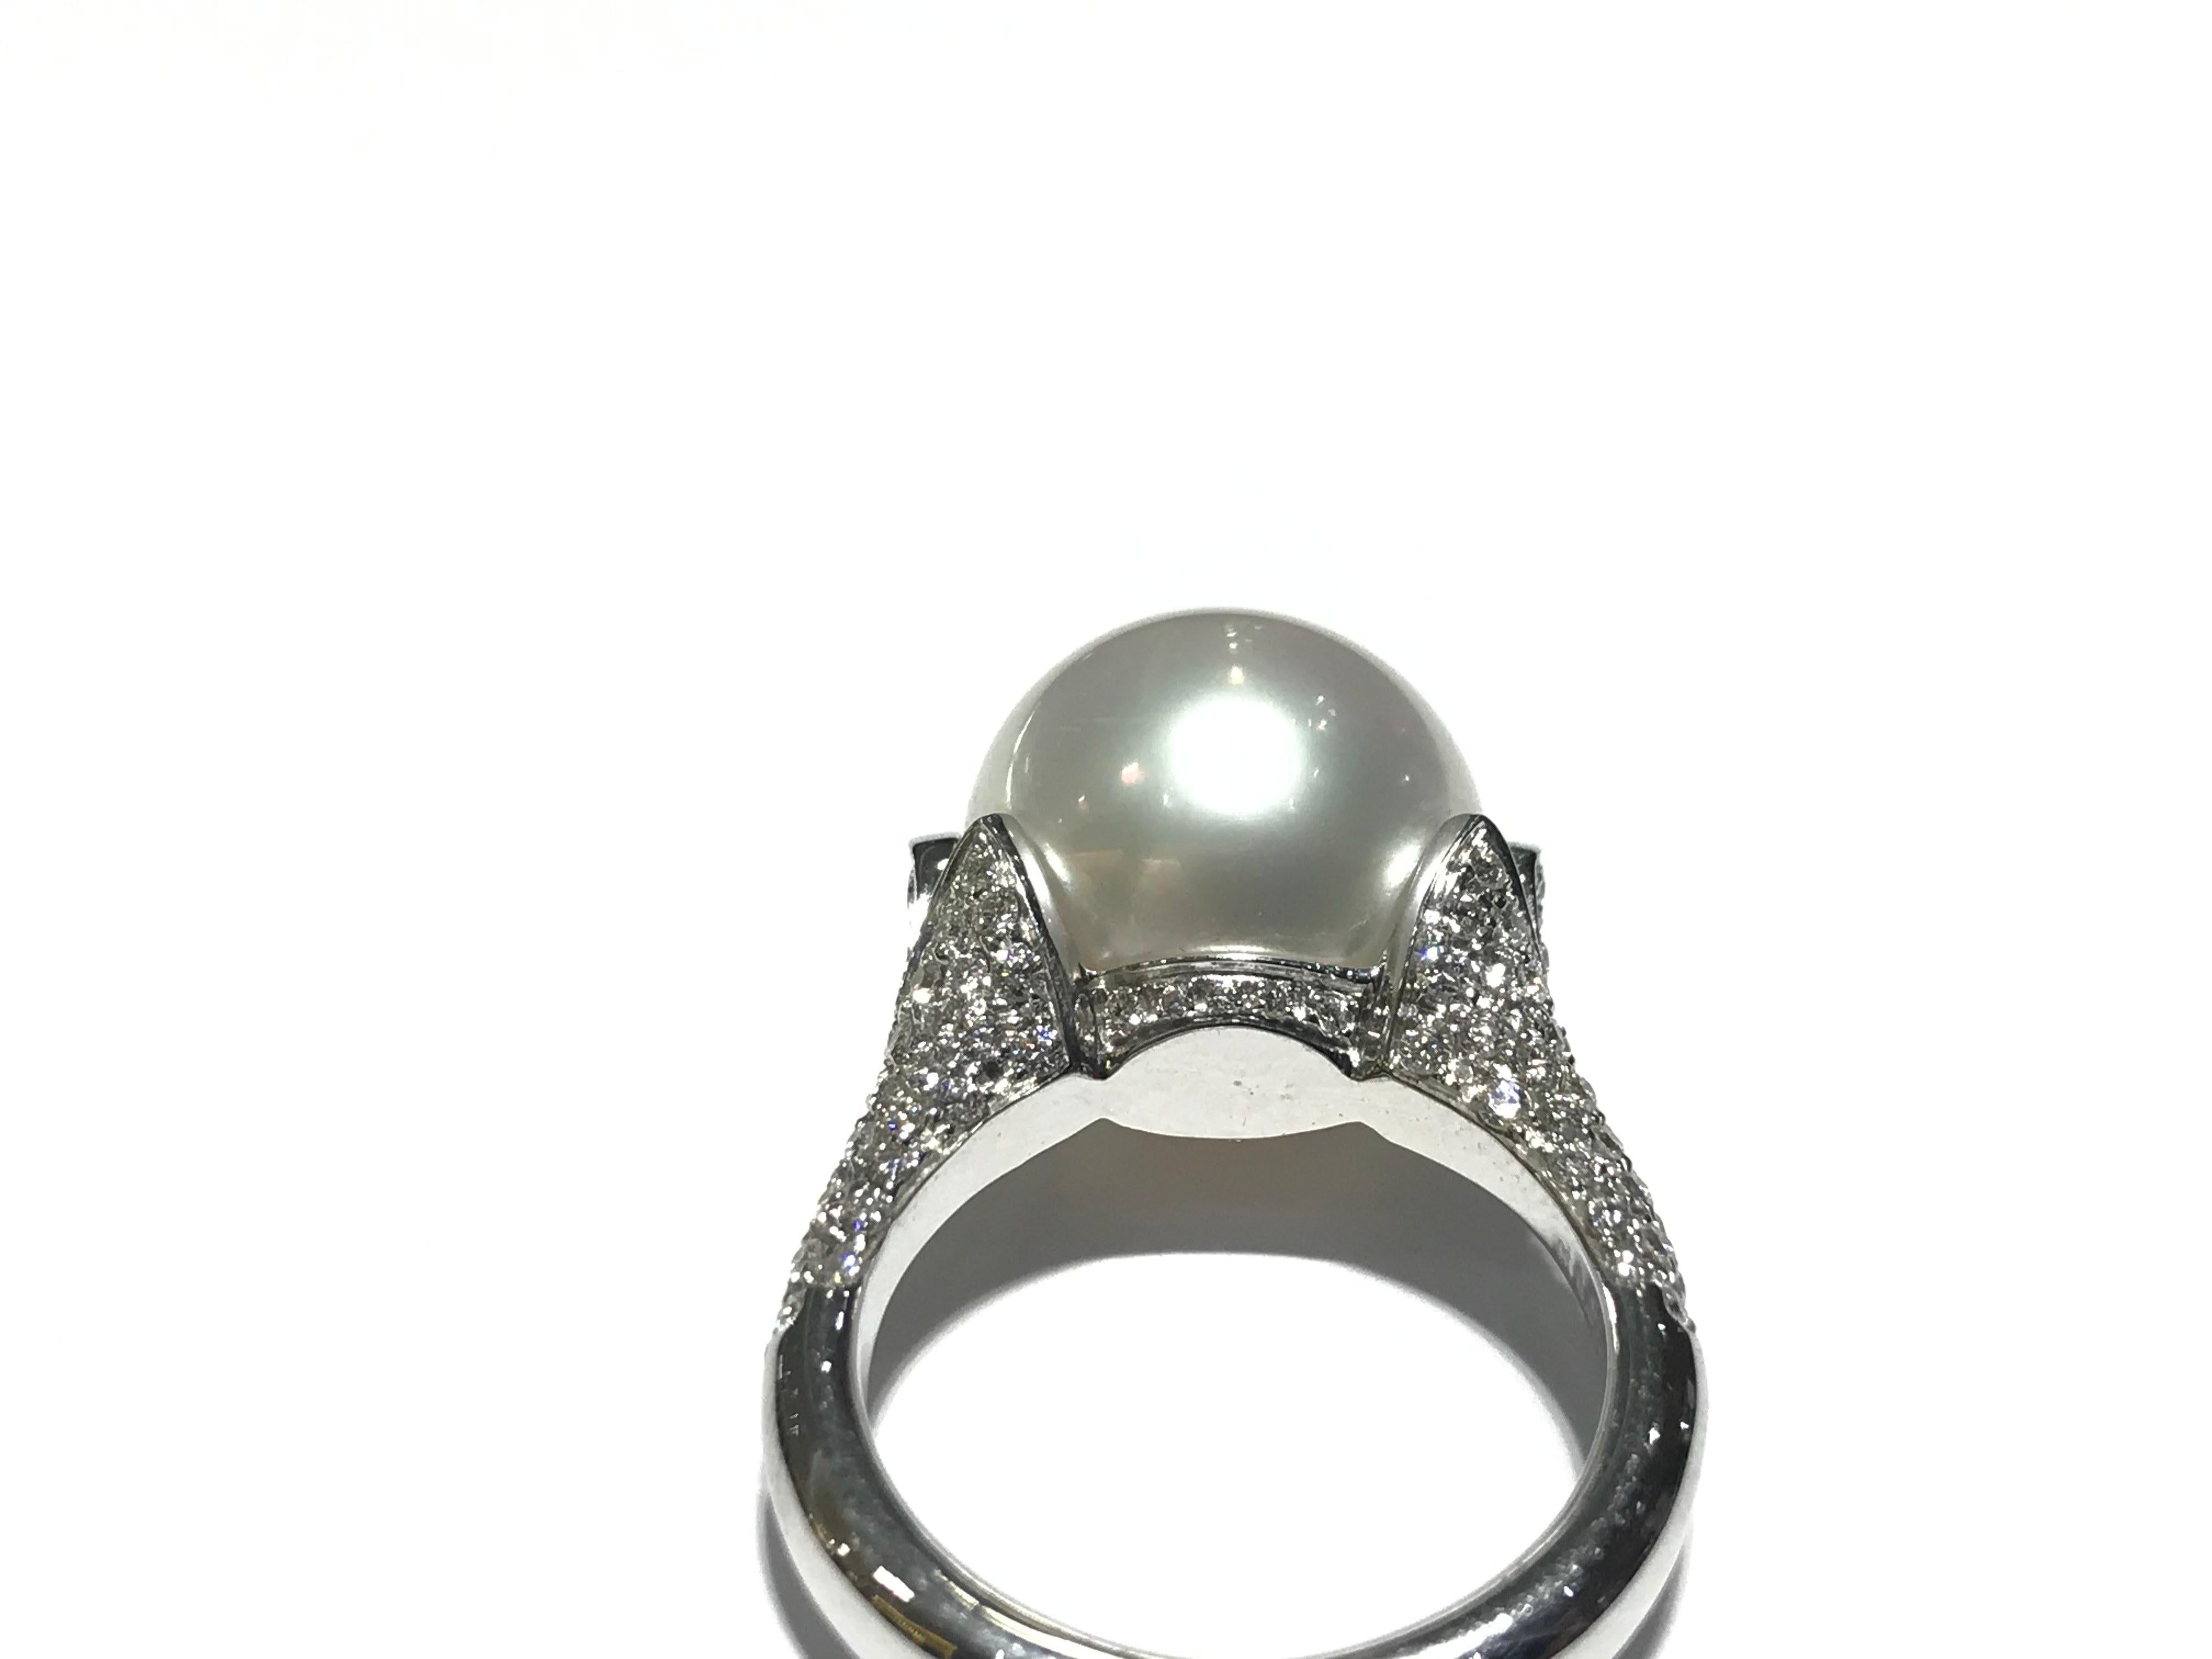 Crivelli South Sea Pearl with Diamond setting in 18kt White gold 
14.5 mm South Sea Pearl
0.55ct diamonds on setting VS clarity EF colour
18kt white gold setting